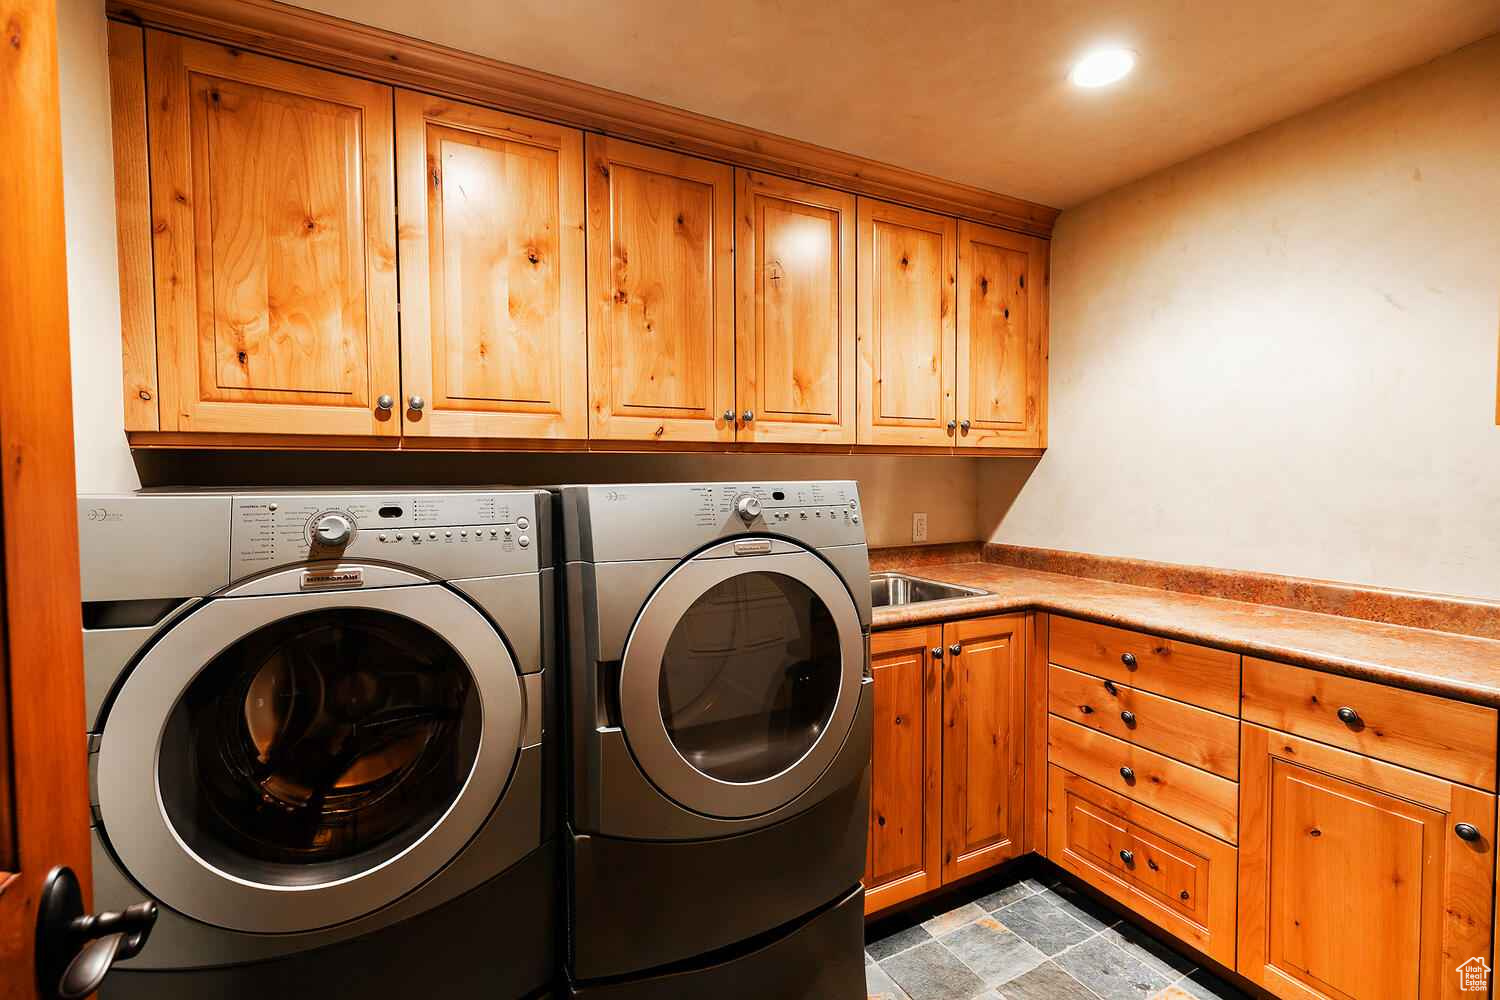 Clothes washing area featuring cabinets, light tile floors, and washer and dryer